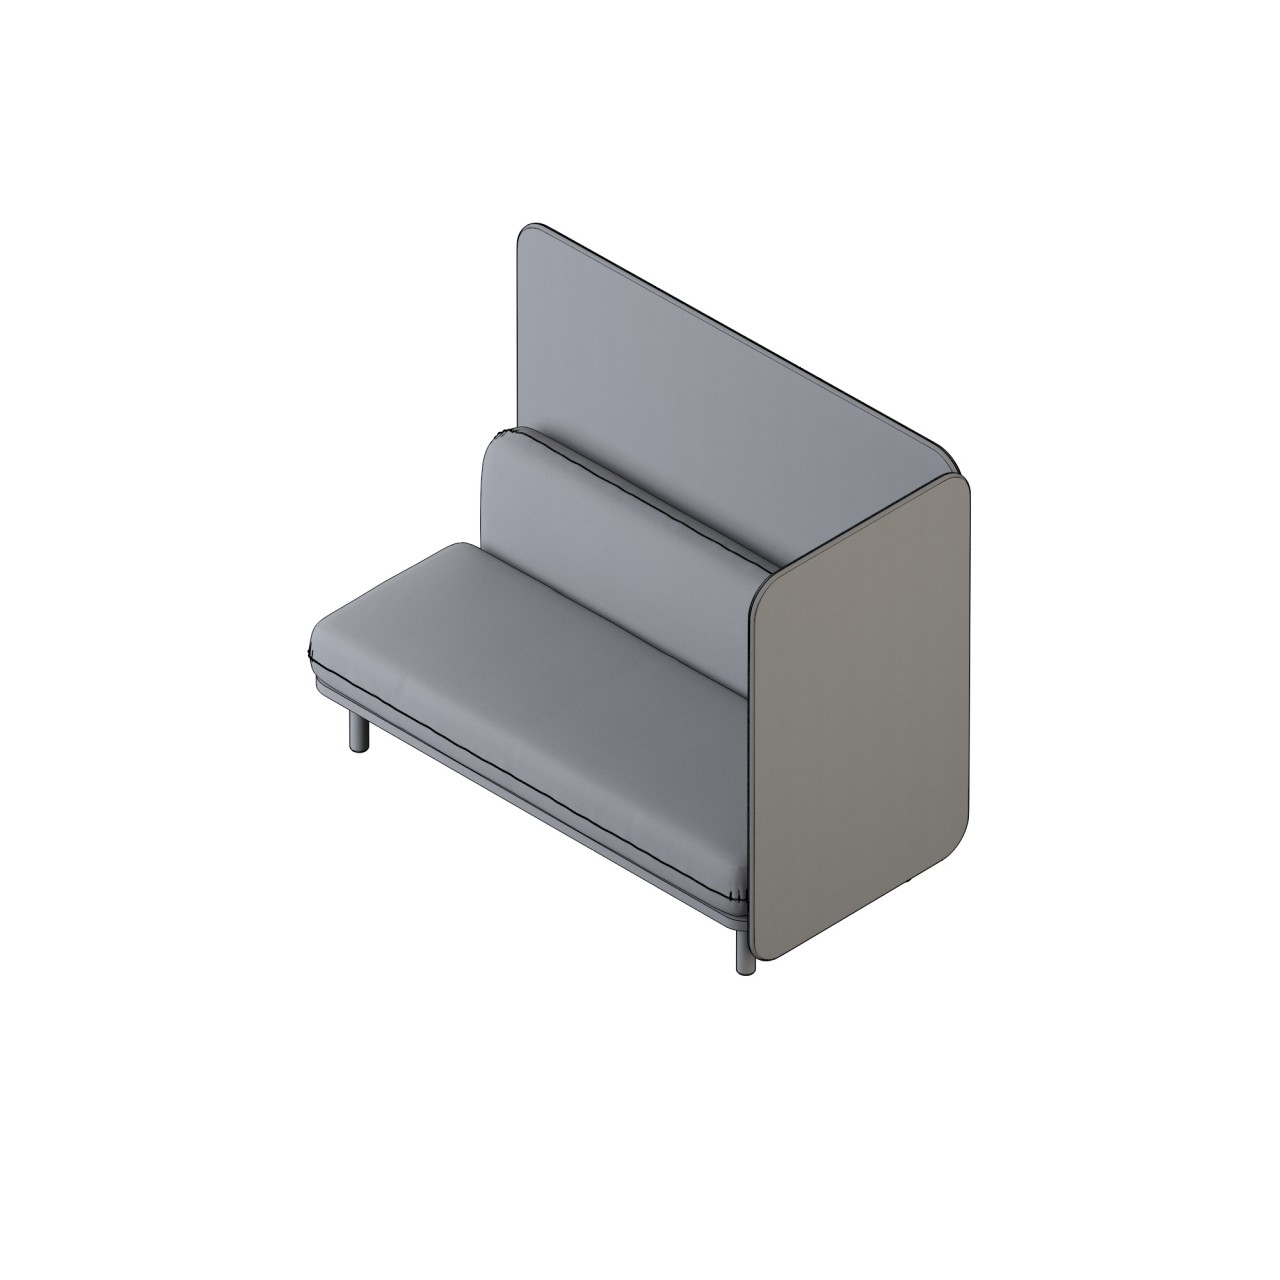 Soft - 24004 BL
two seat privacy
back and left
COM 6.5
back 2.25,
base 2, seat 4.25,
panels 12.75